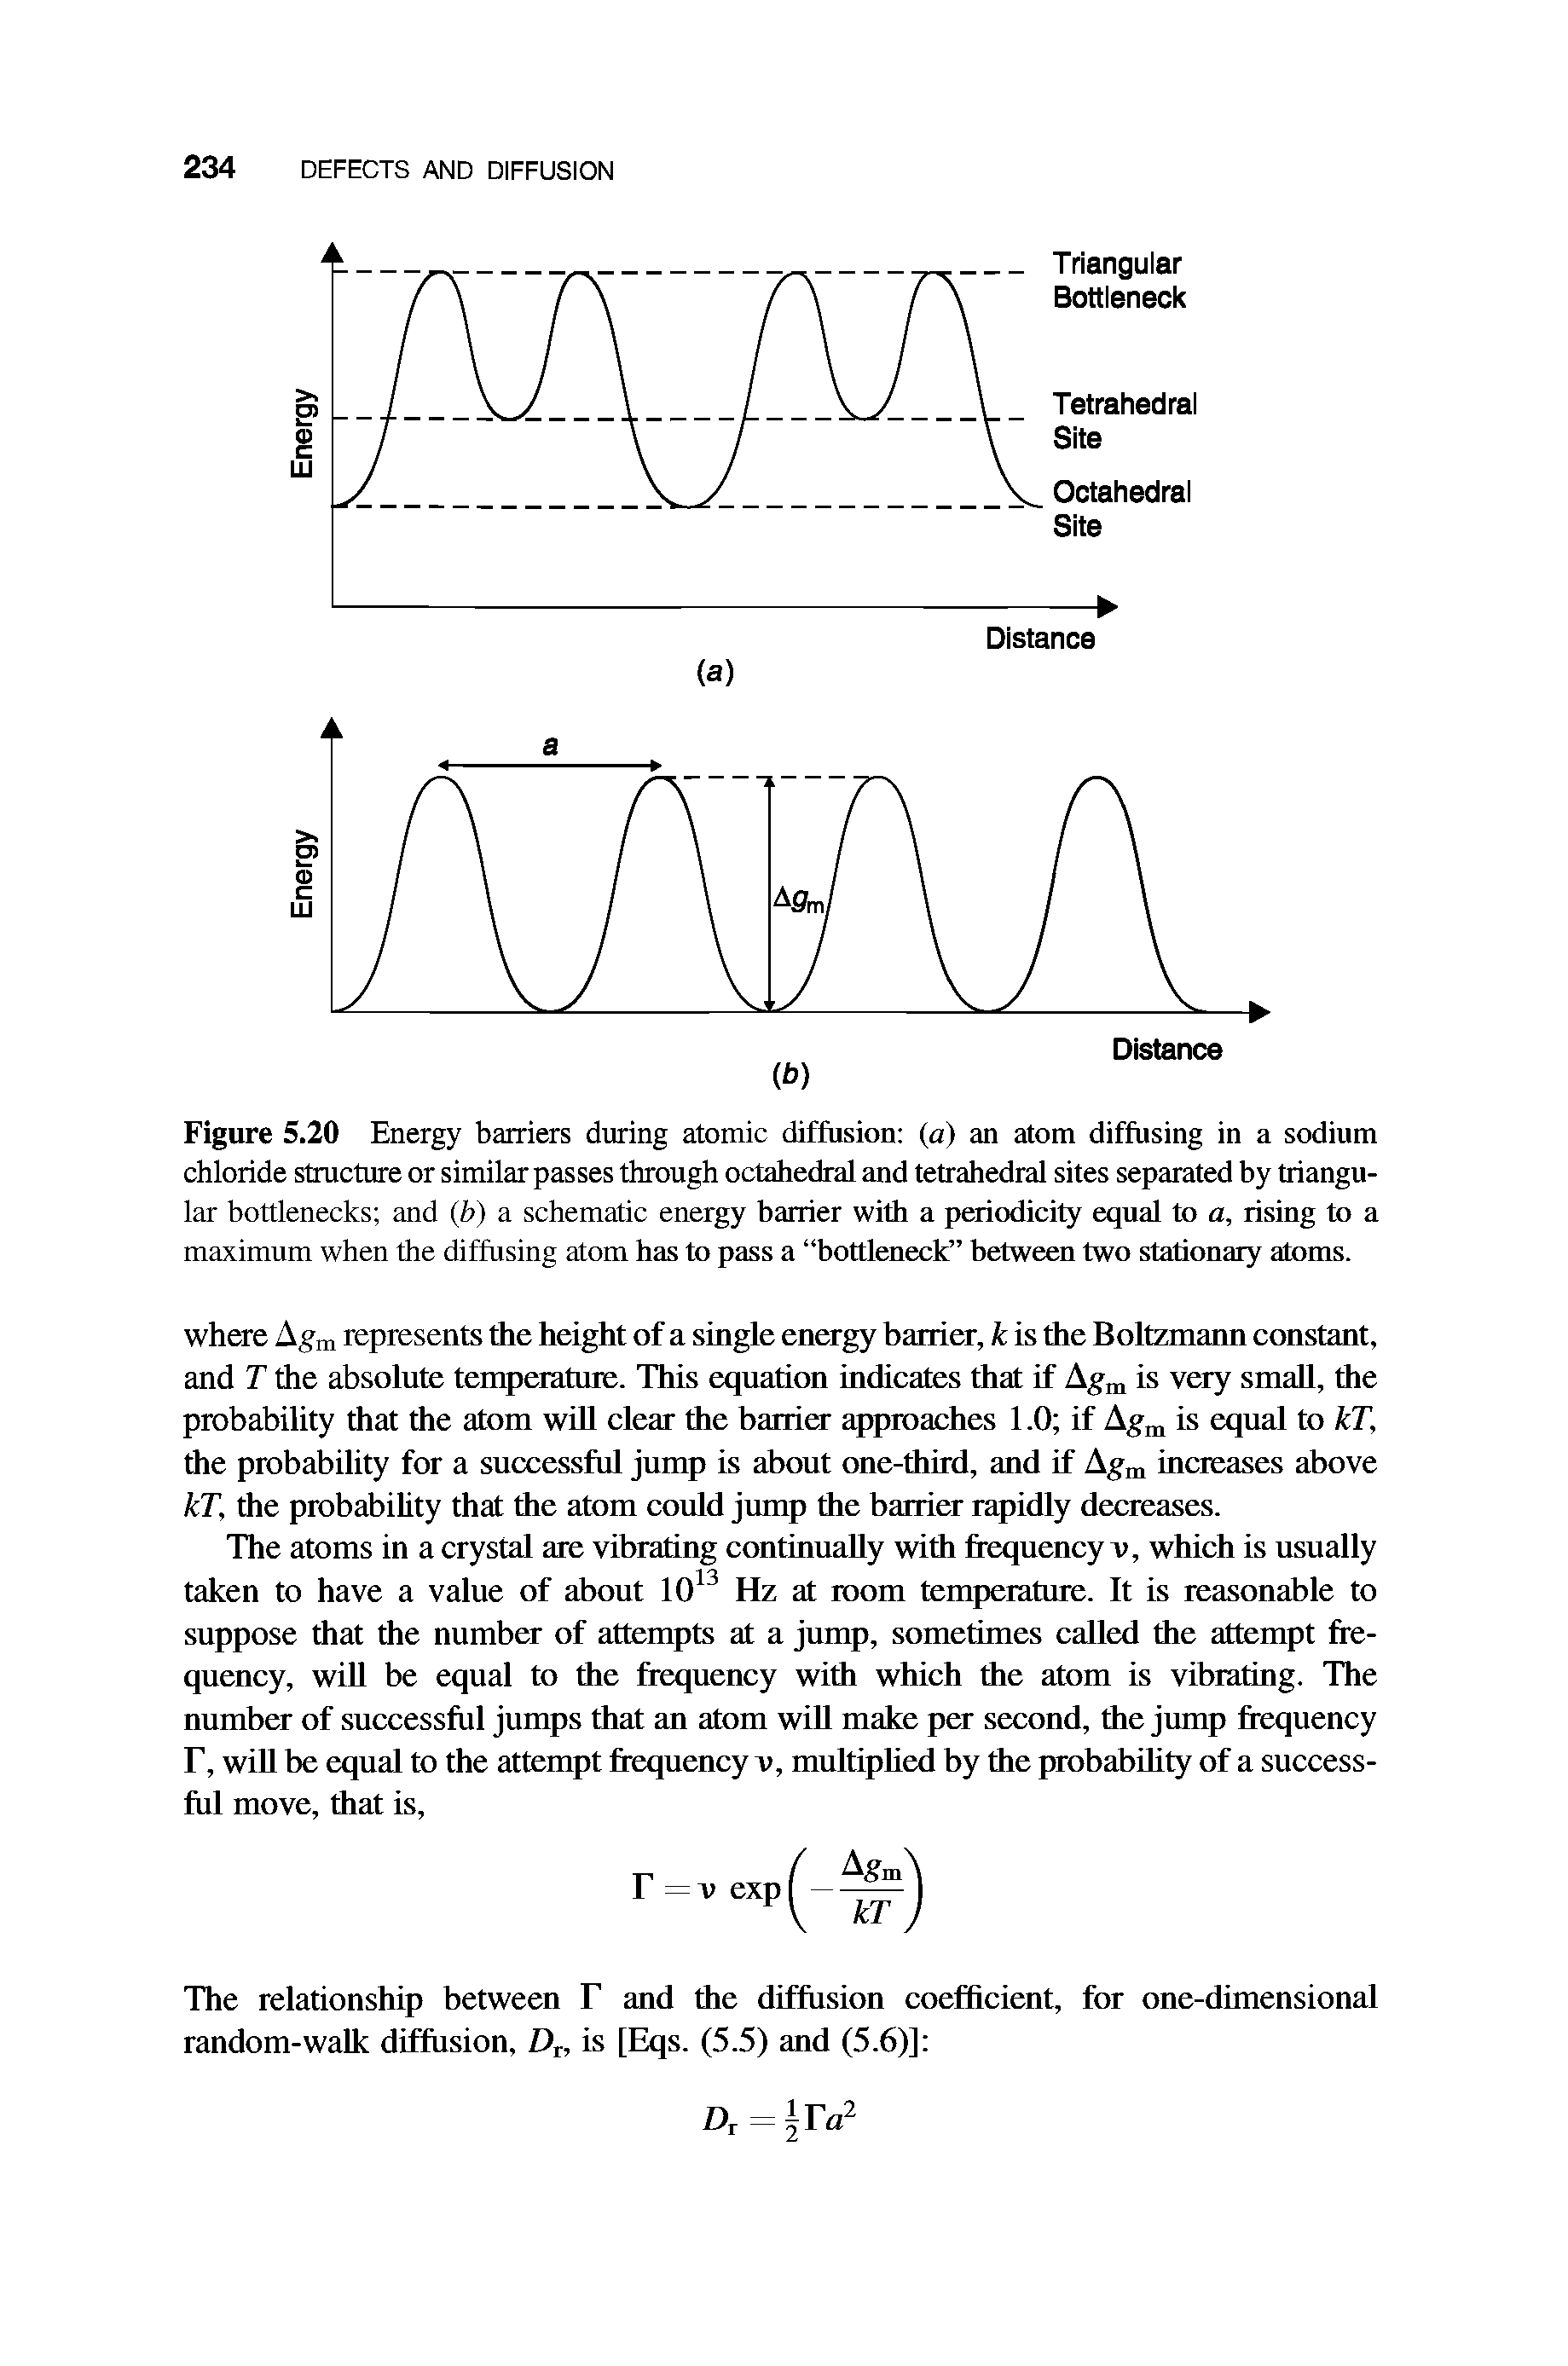 Figure 5.20 Energy barriers during atomic diffusion (a) an atom diffusing in a sodium chloride structure or similar passes through octahedral and tetrahedral sites separated by triangular bottlenecks and (b) a schematic energy barrier with a periodicity equal to a, rising to a maximum when the diffusing atom has to pass a bottleneck between two stationary atoms.